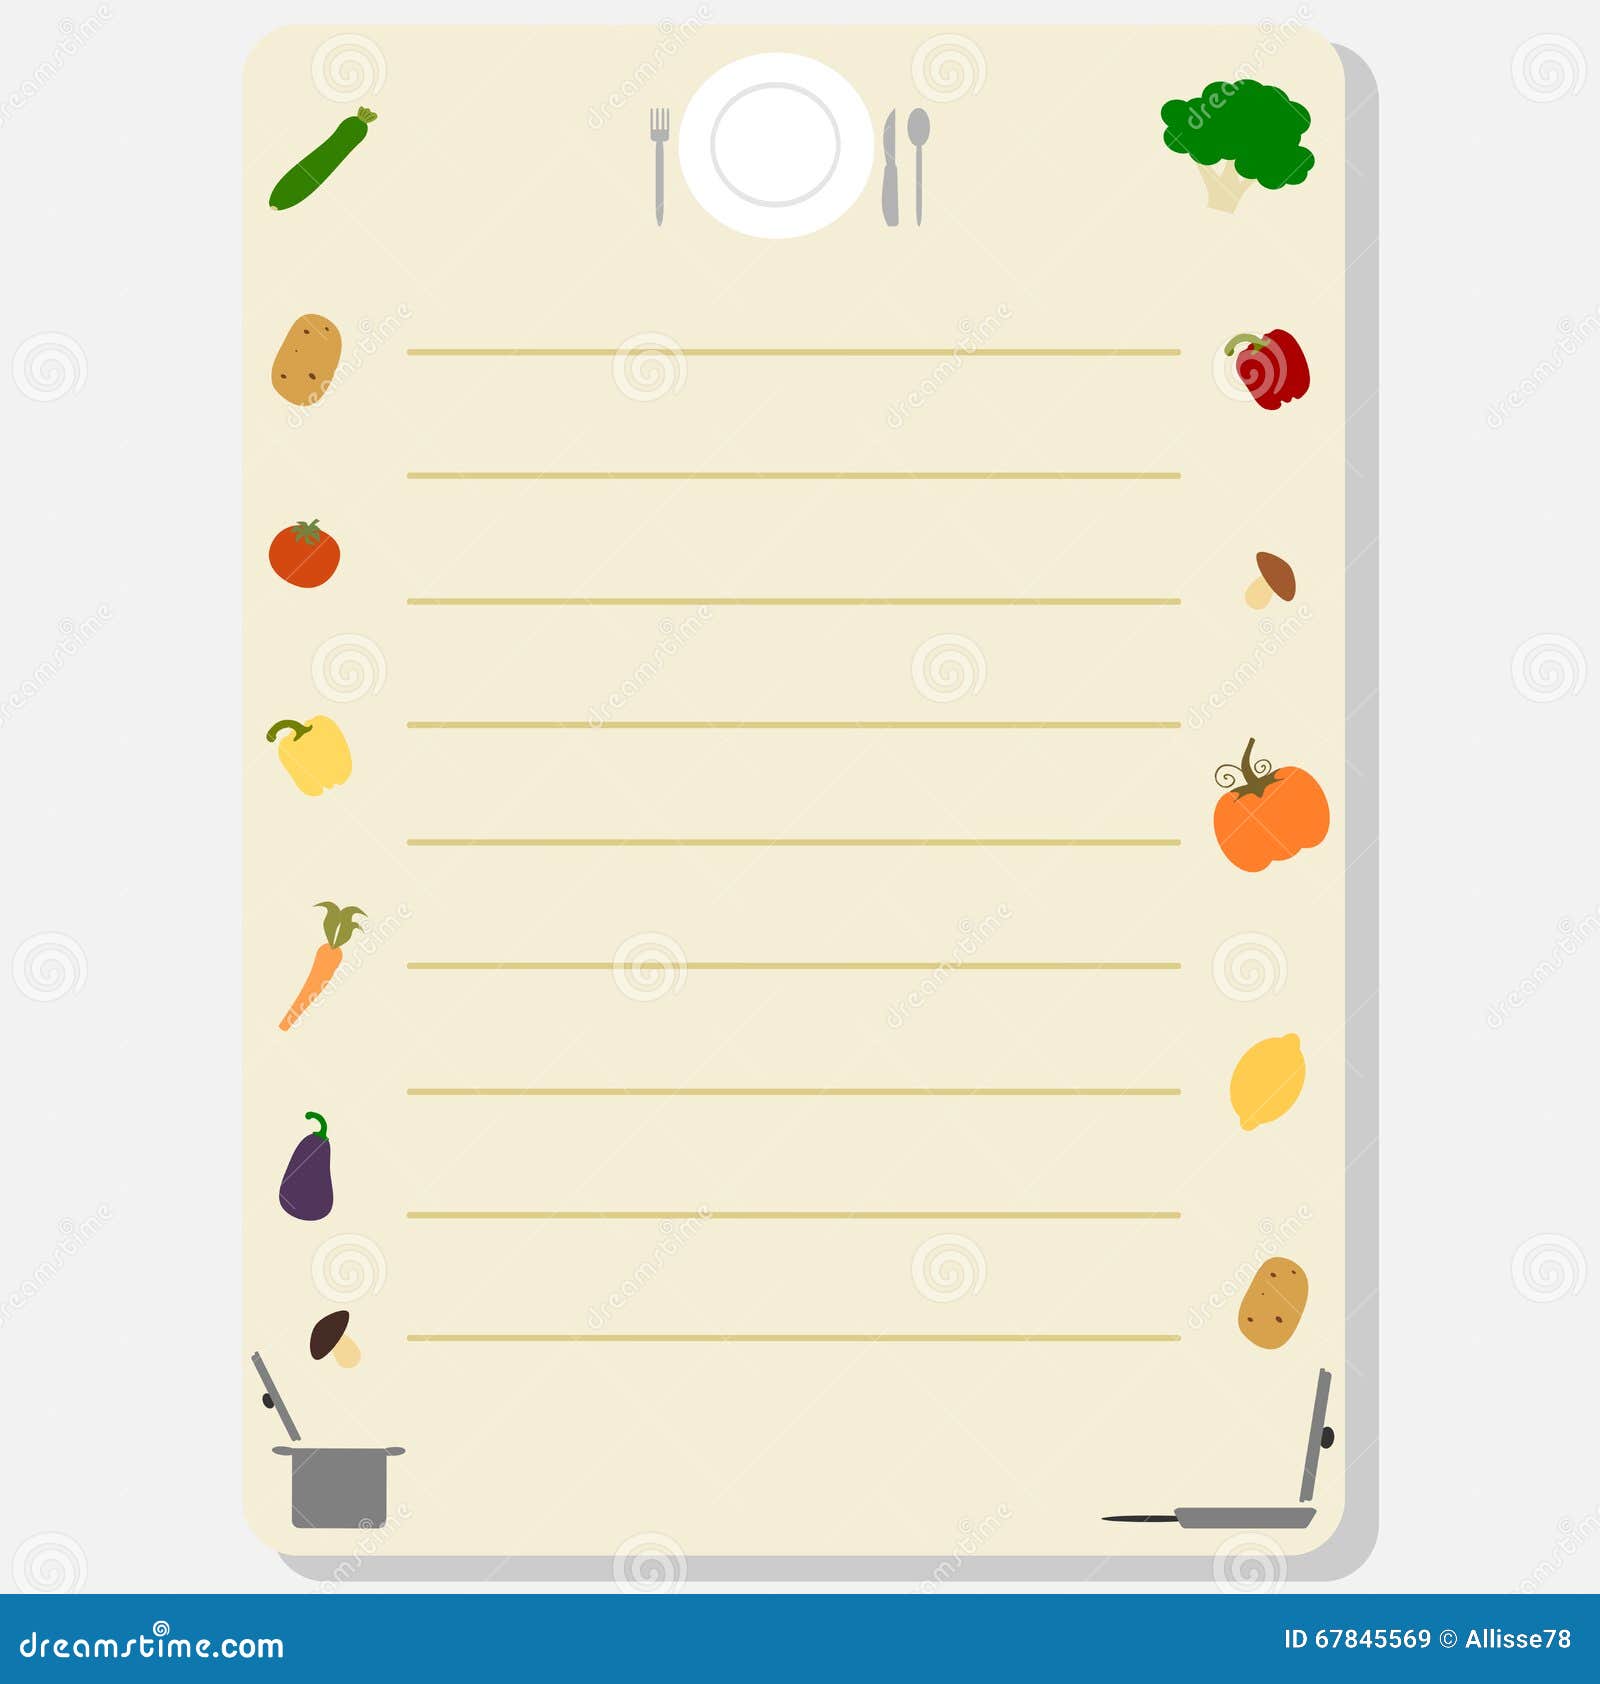 https://thumbs.dreamstime.com/z/cute-colorful-template-frame-recipe-book-card-illustration-vegetables-vector-67845569.jpg